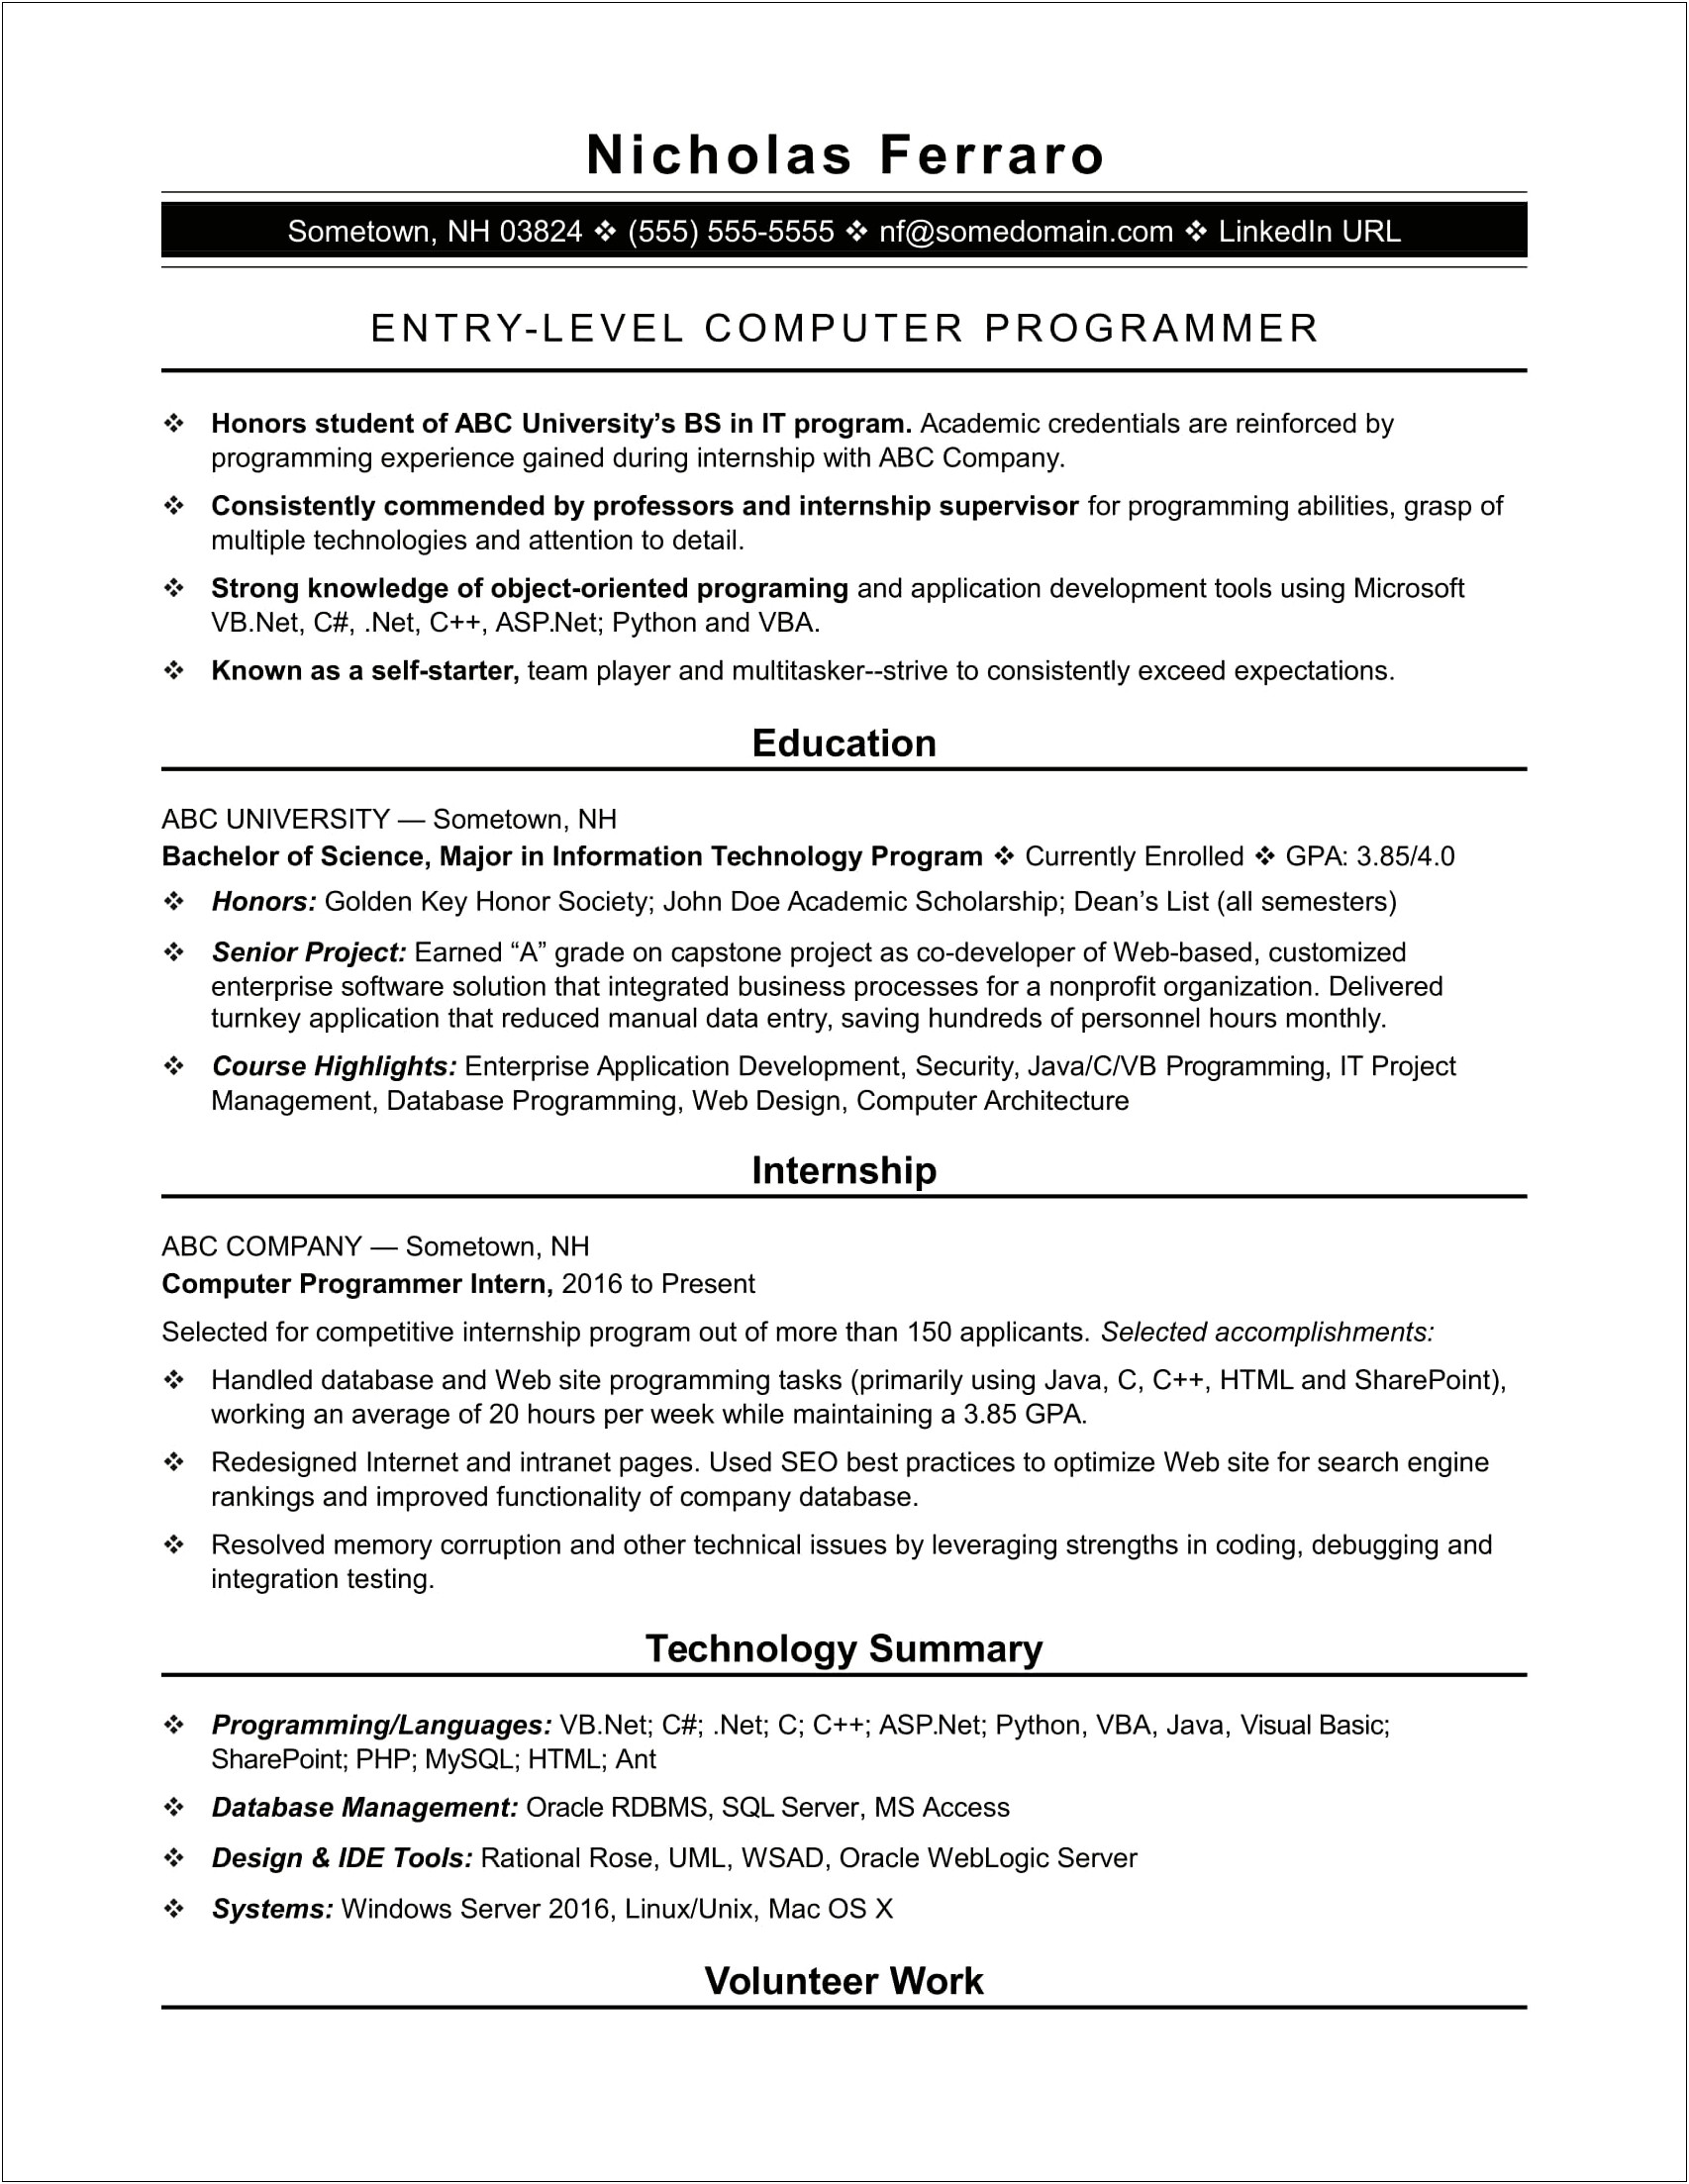 Java Projects To Put In Resume